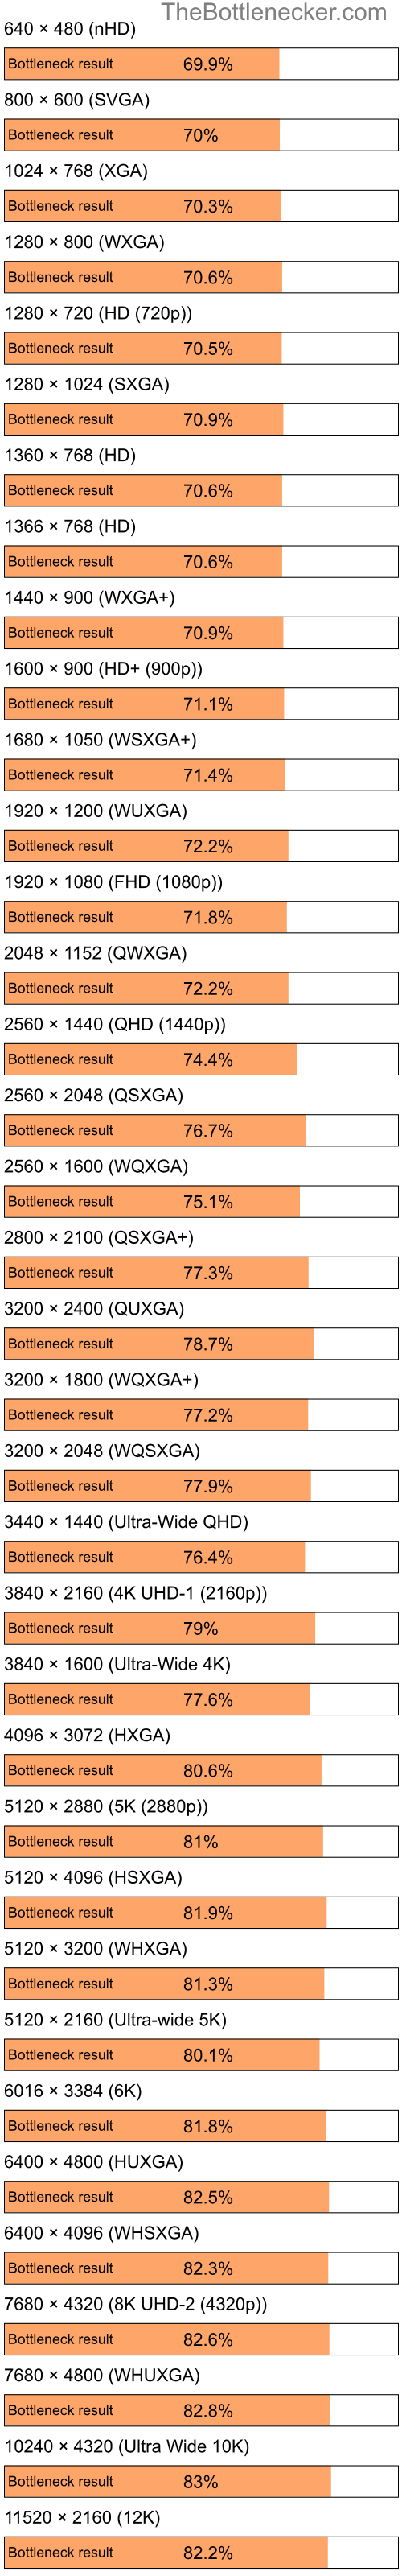 Bottleneck results by resolution for Intel Pentium 4 and NVIDIA GeForce 7300 GS in Graphic Card Intense Tasks